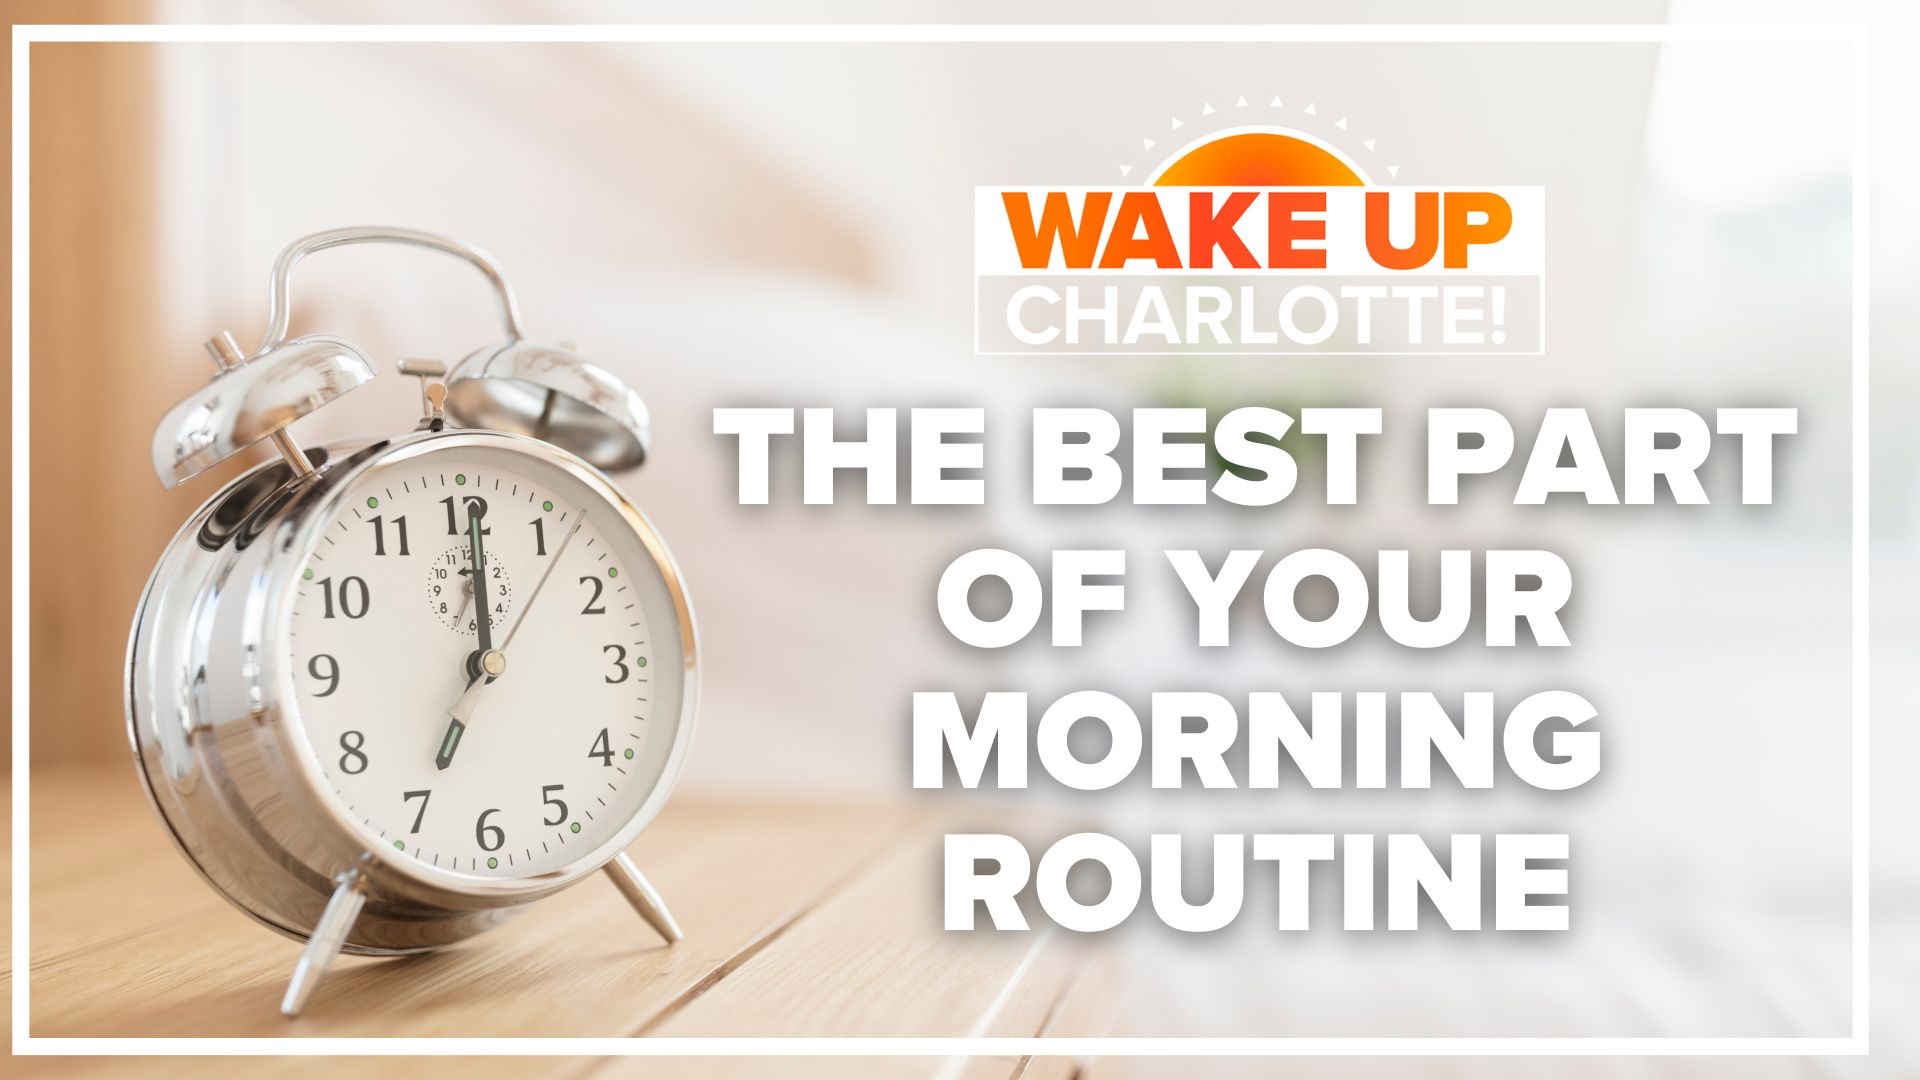 Researchers in the UK have calculated the "perfect" morning routine. But it's not for everyone. What's your favorite part of waking up each day?